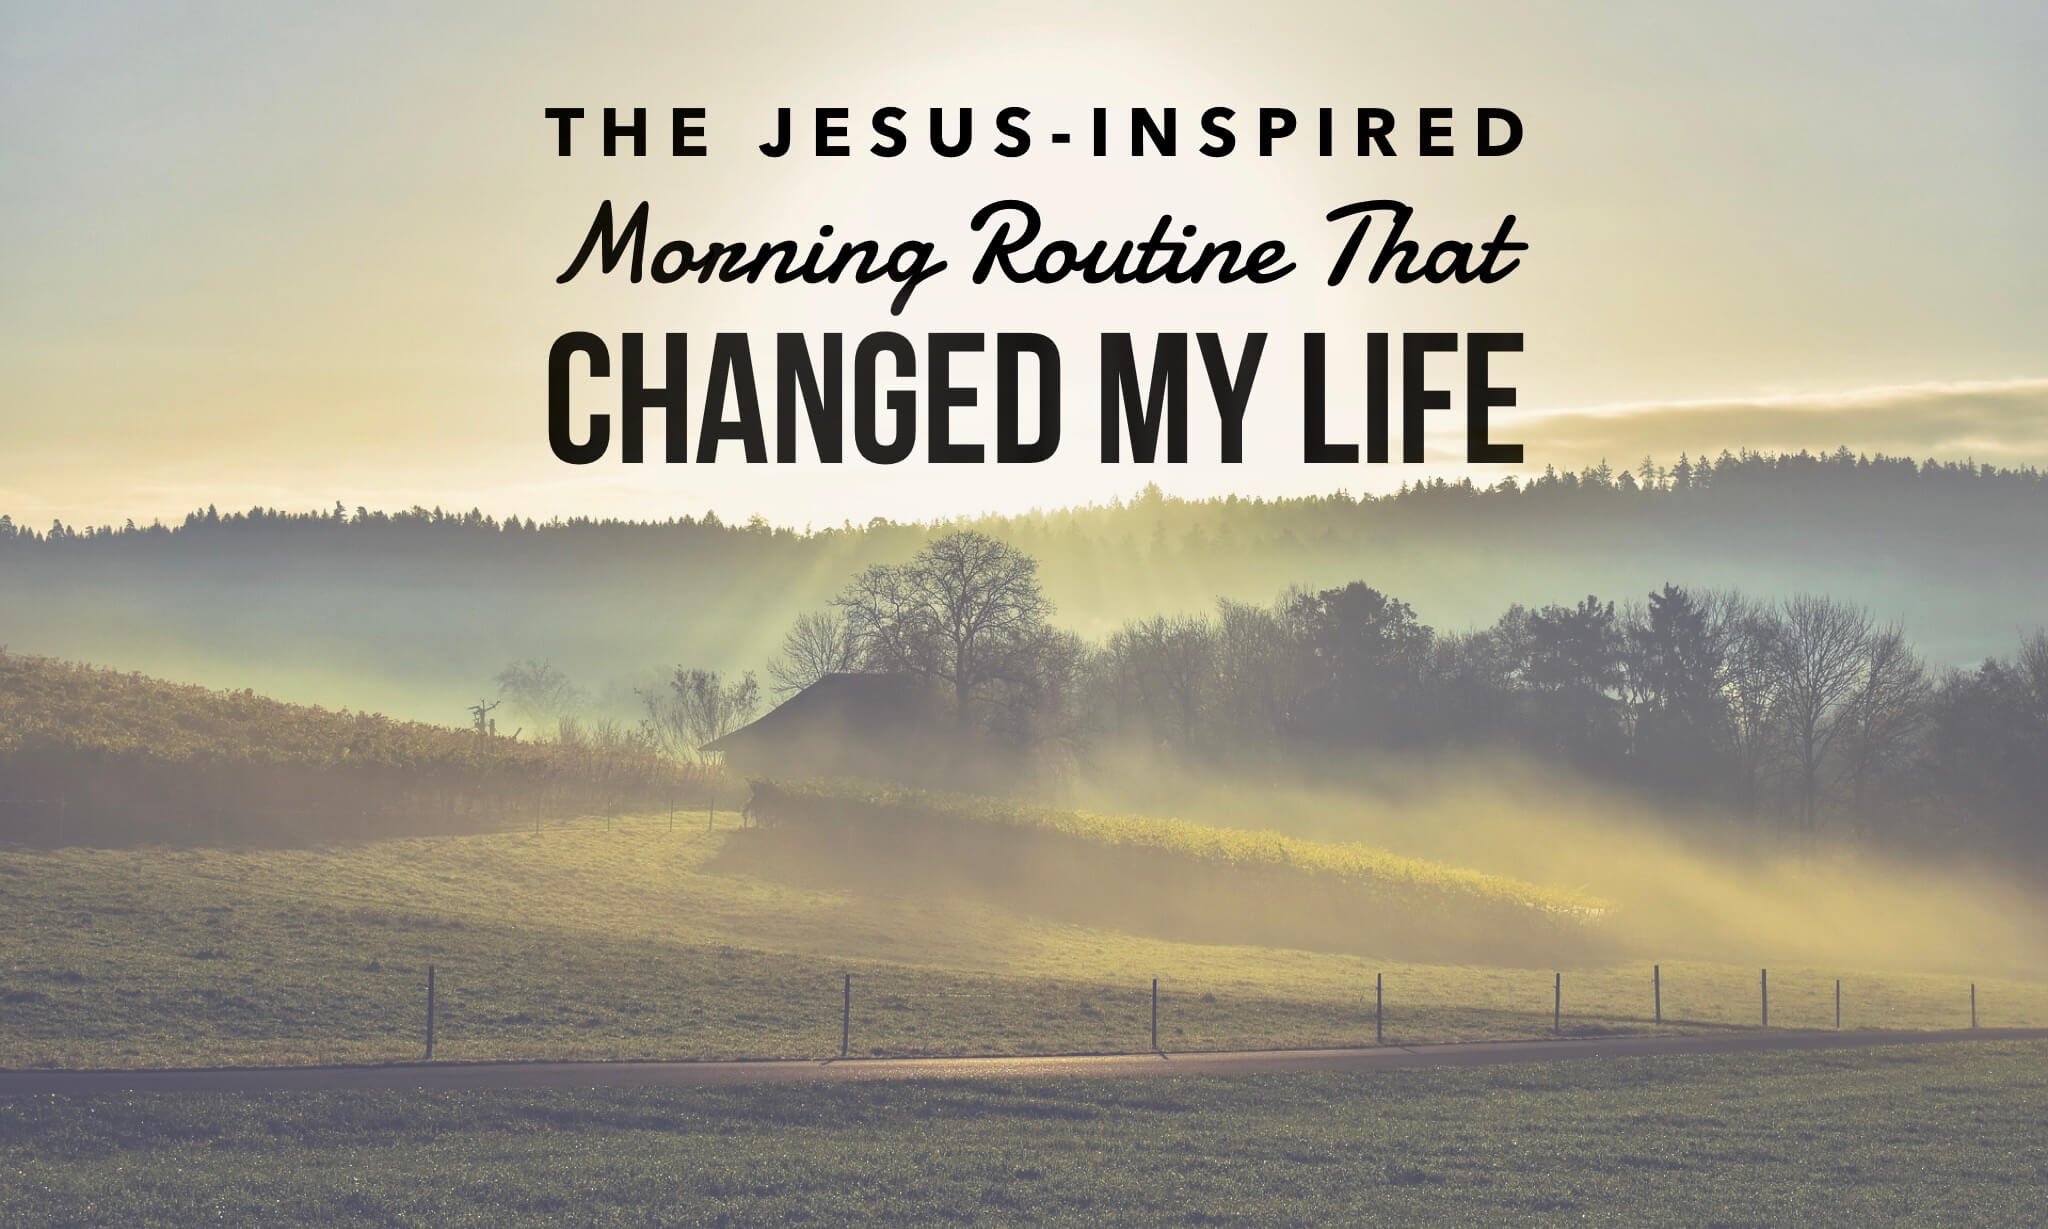 The Jesus-Inspired Morning Routine That Changed My Life